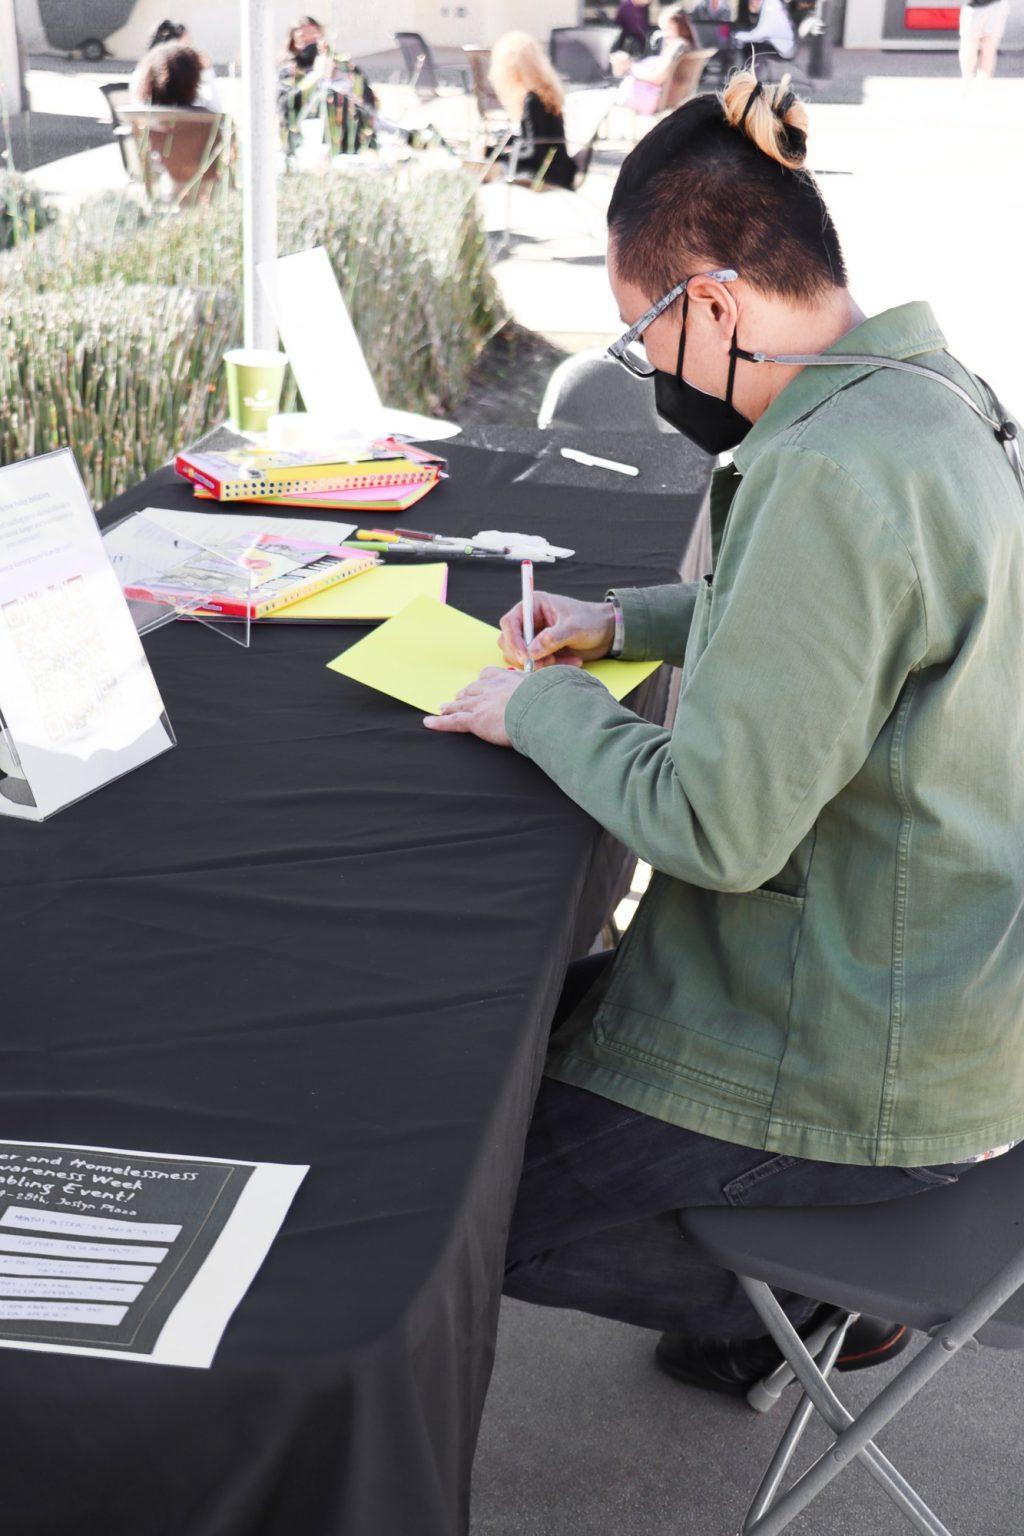 Associate Chaplain Zac Luben writes encouraging notes to the insecure housing community of Los Angeles. To personalize the kits, students wrote Bible verses and inspiring statements on note cards to add to the bags.